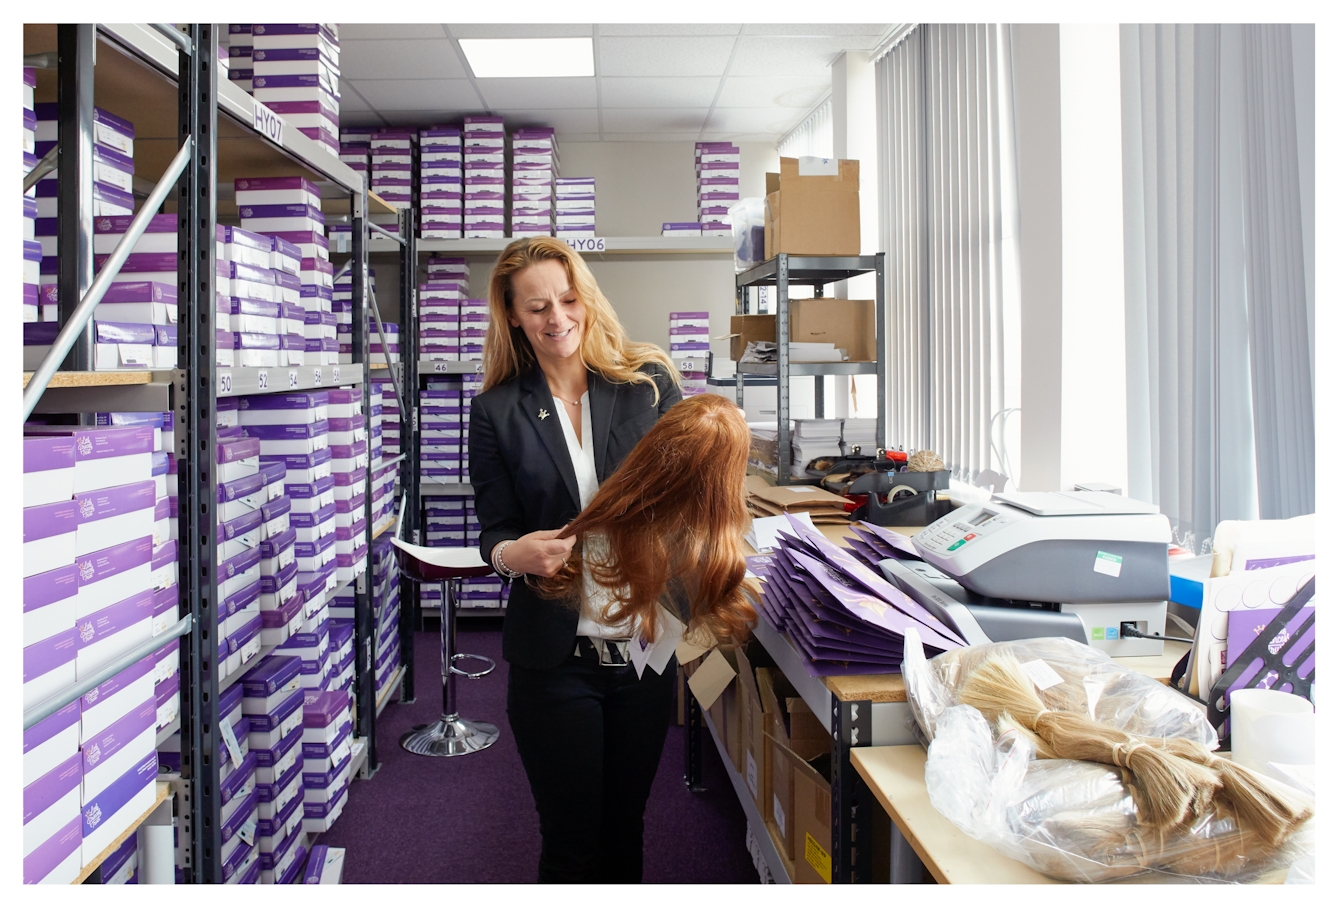 Photograph showing a woman dressed in a white blouse and dark jacket standing in a storeroom. She is looking down at her hands,  in which she is holding a ginger coloured wig. Surrounding her is shelving containing many purple and white boxes stacked on top of one another. To the right is a table top containing a piece of office equipment, purple envelopes and a bag of cut blonde hair.